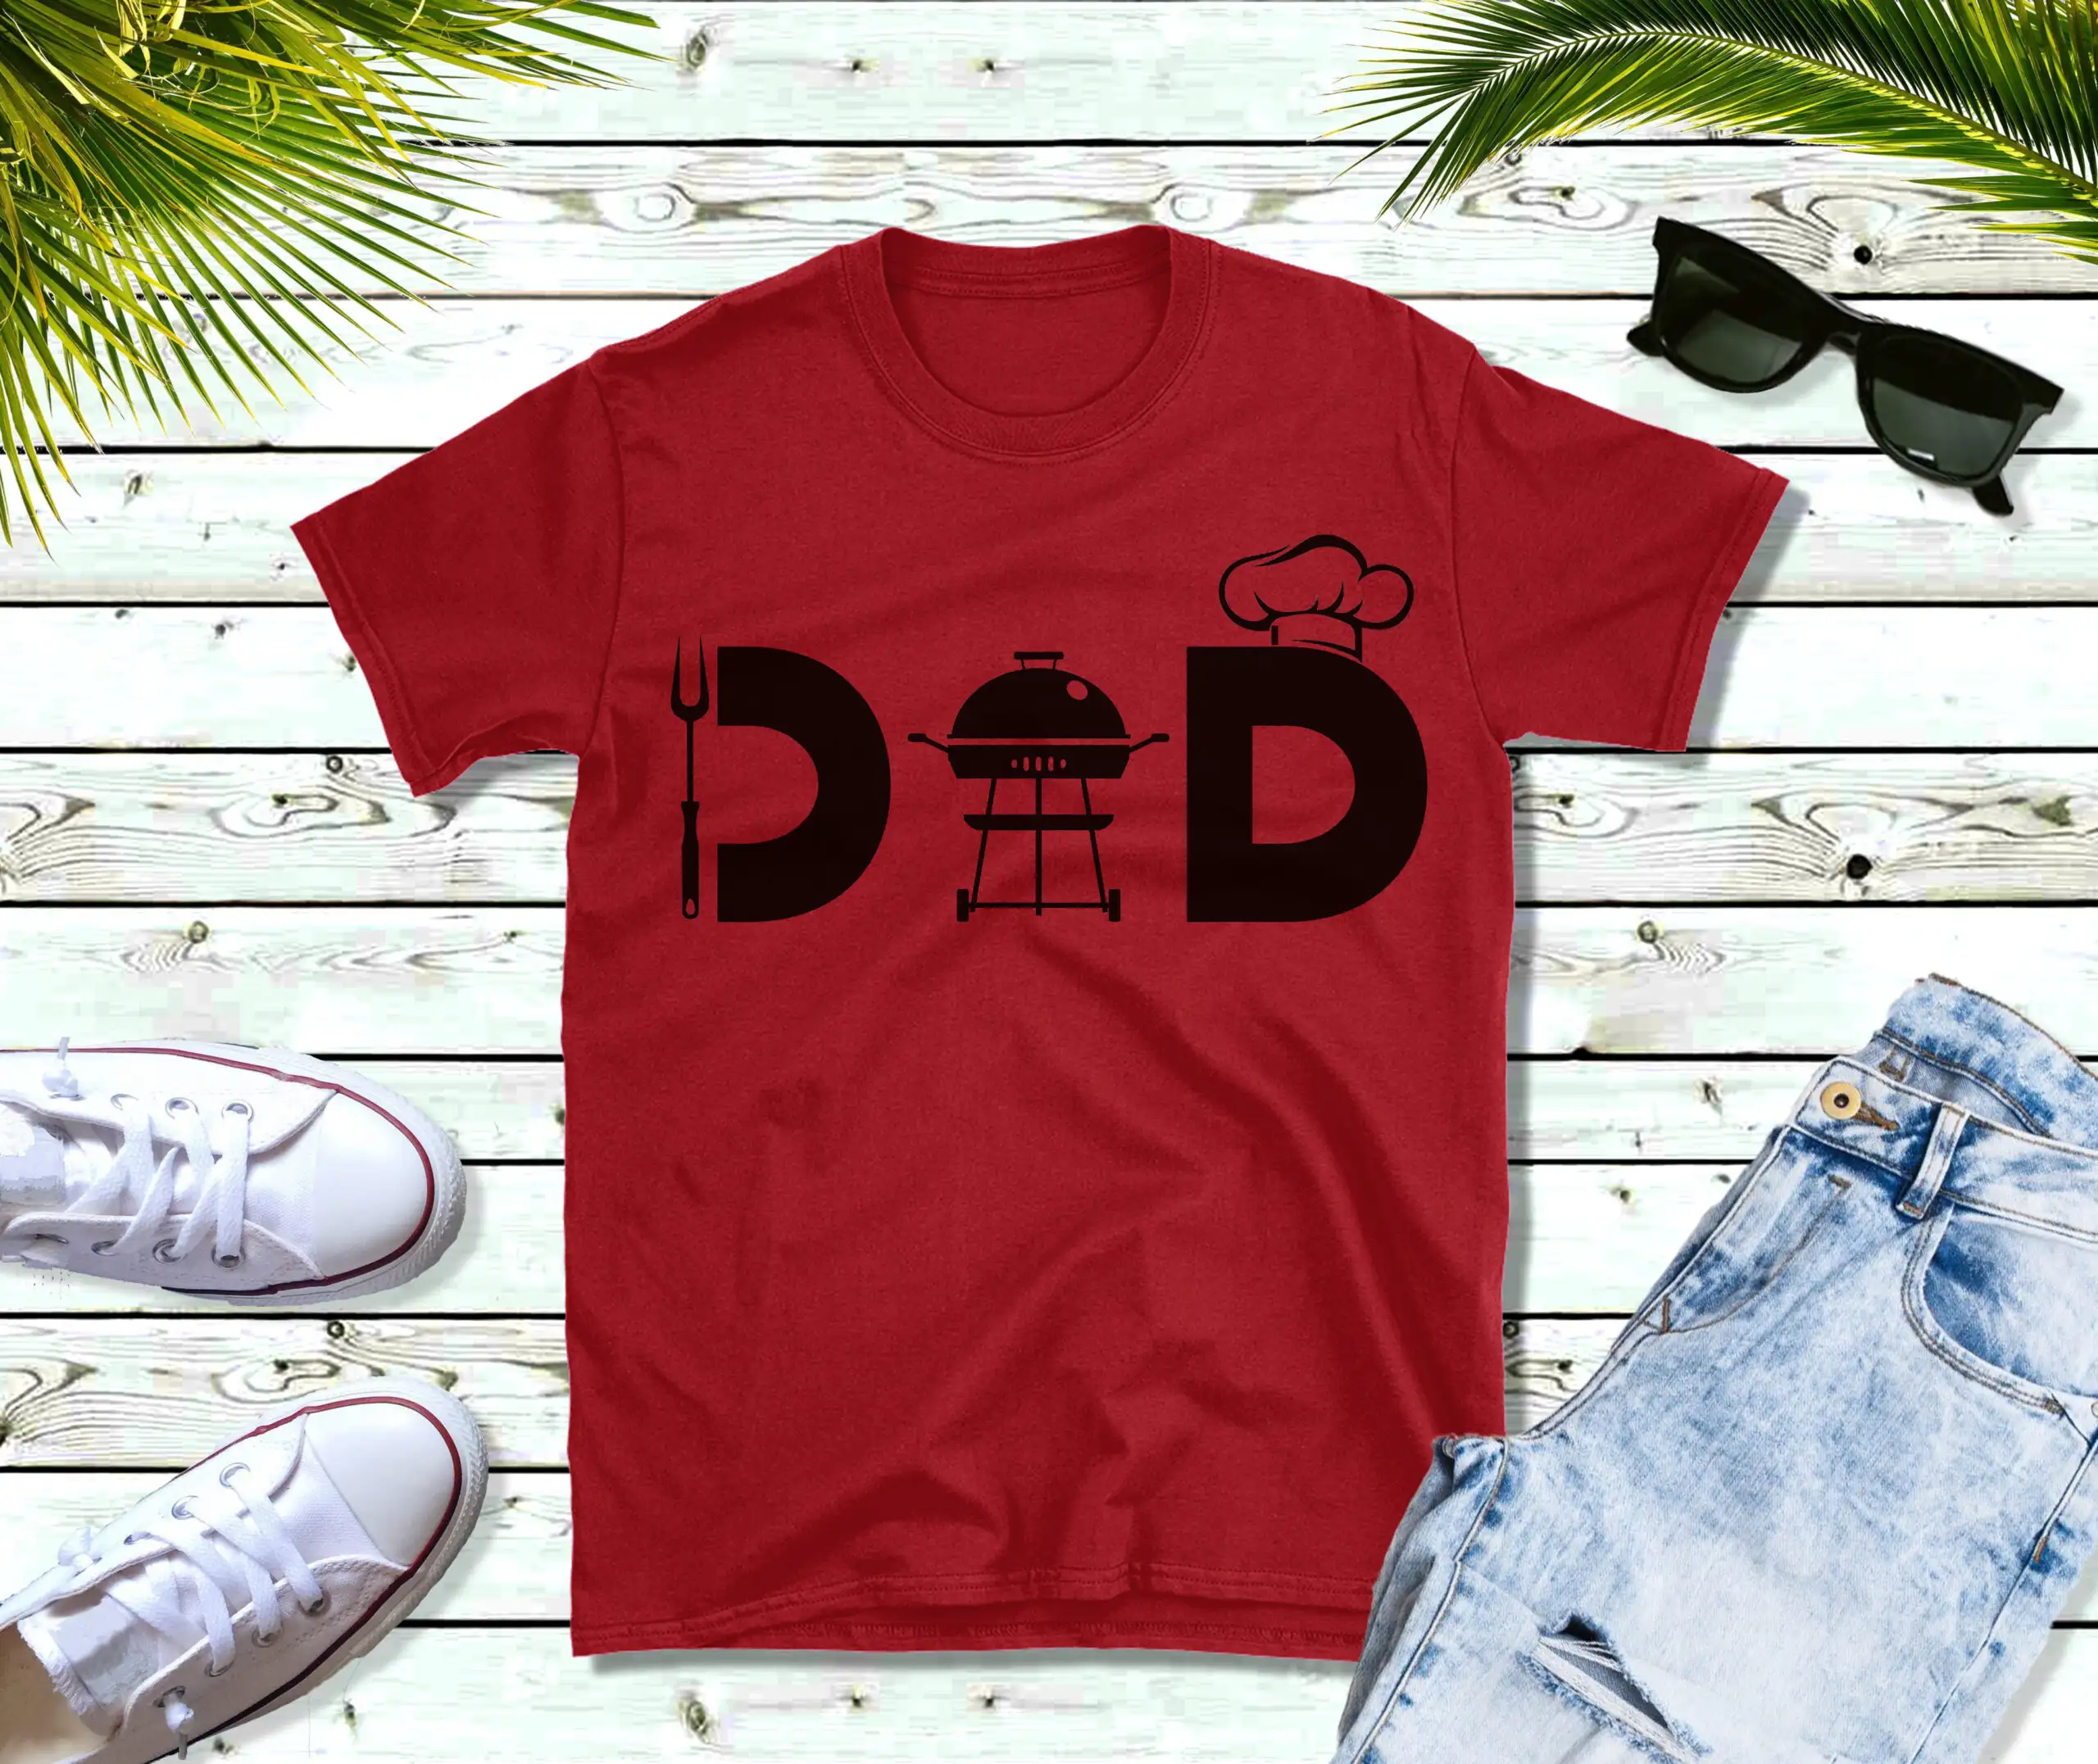 Free DAD BBQ SVG Cutting File for the Cricut.